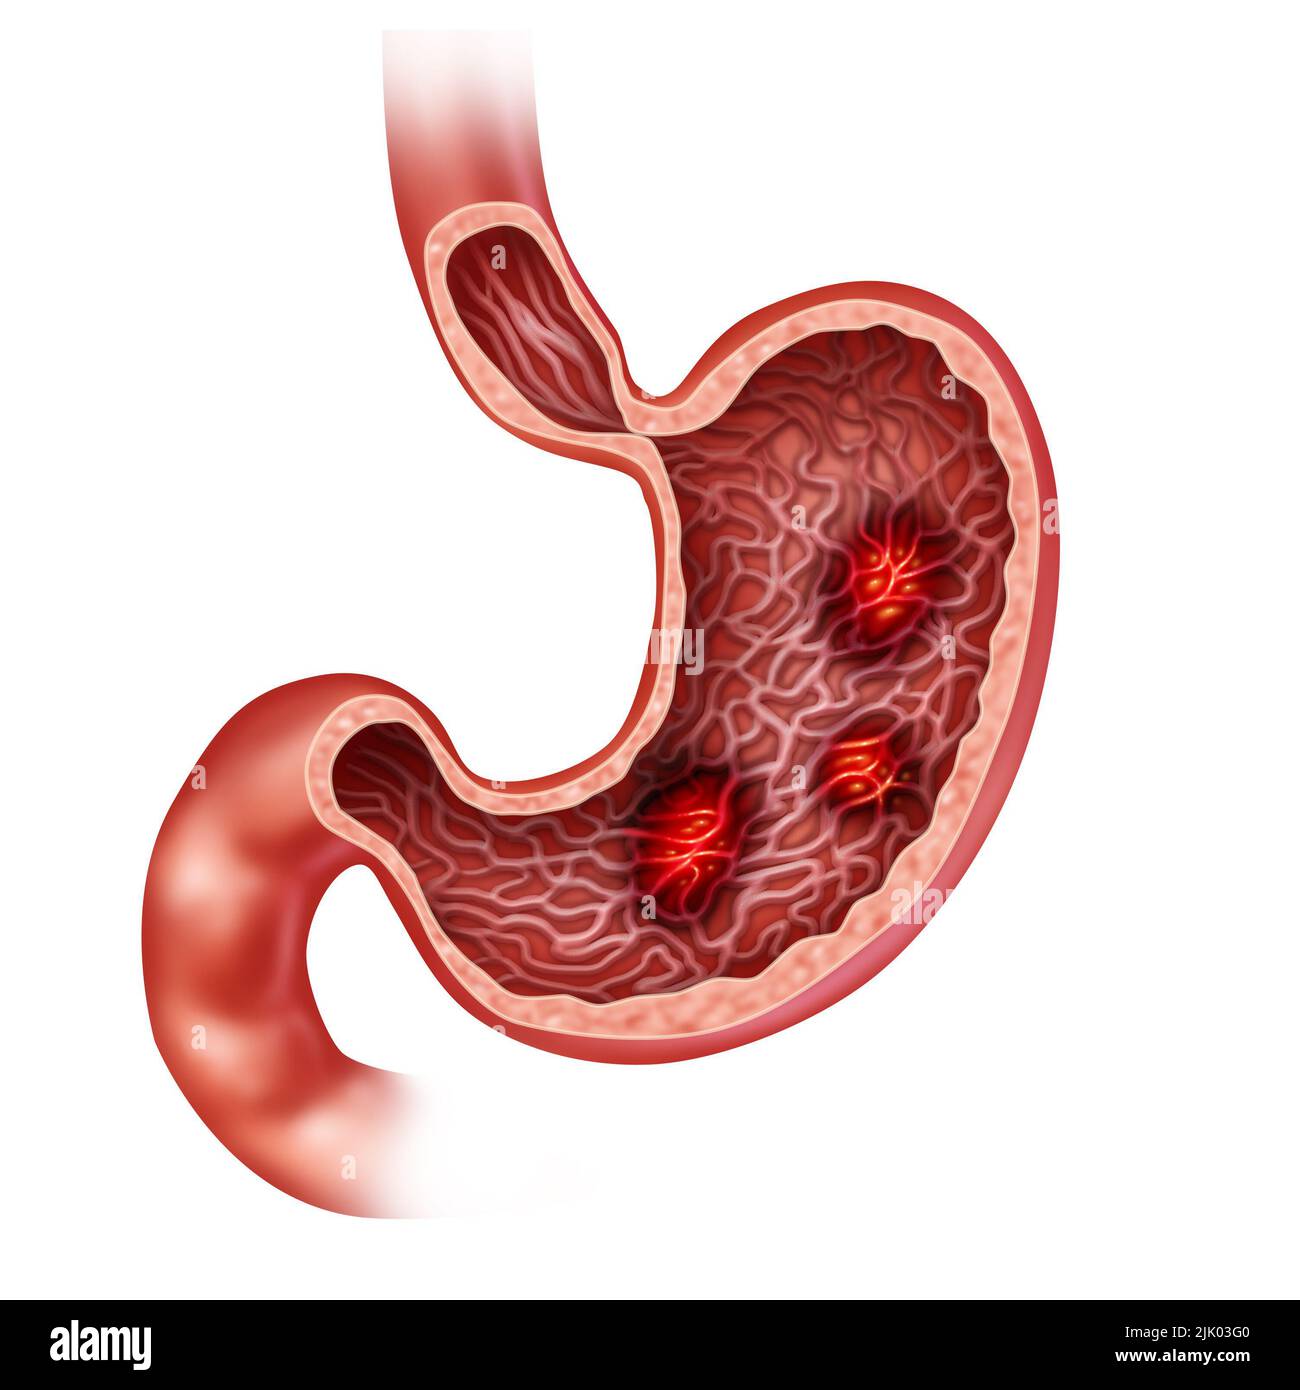 Stomach Ulcers and a painful ulcer concept with burning indigestion pain in the digestive system as a medical illustration of the human digestion orga Stock Photo